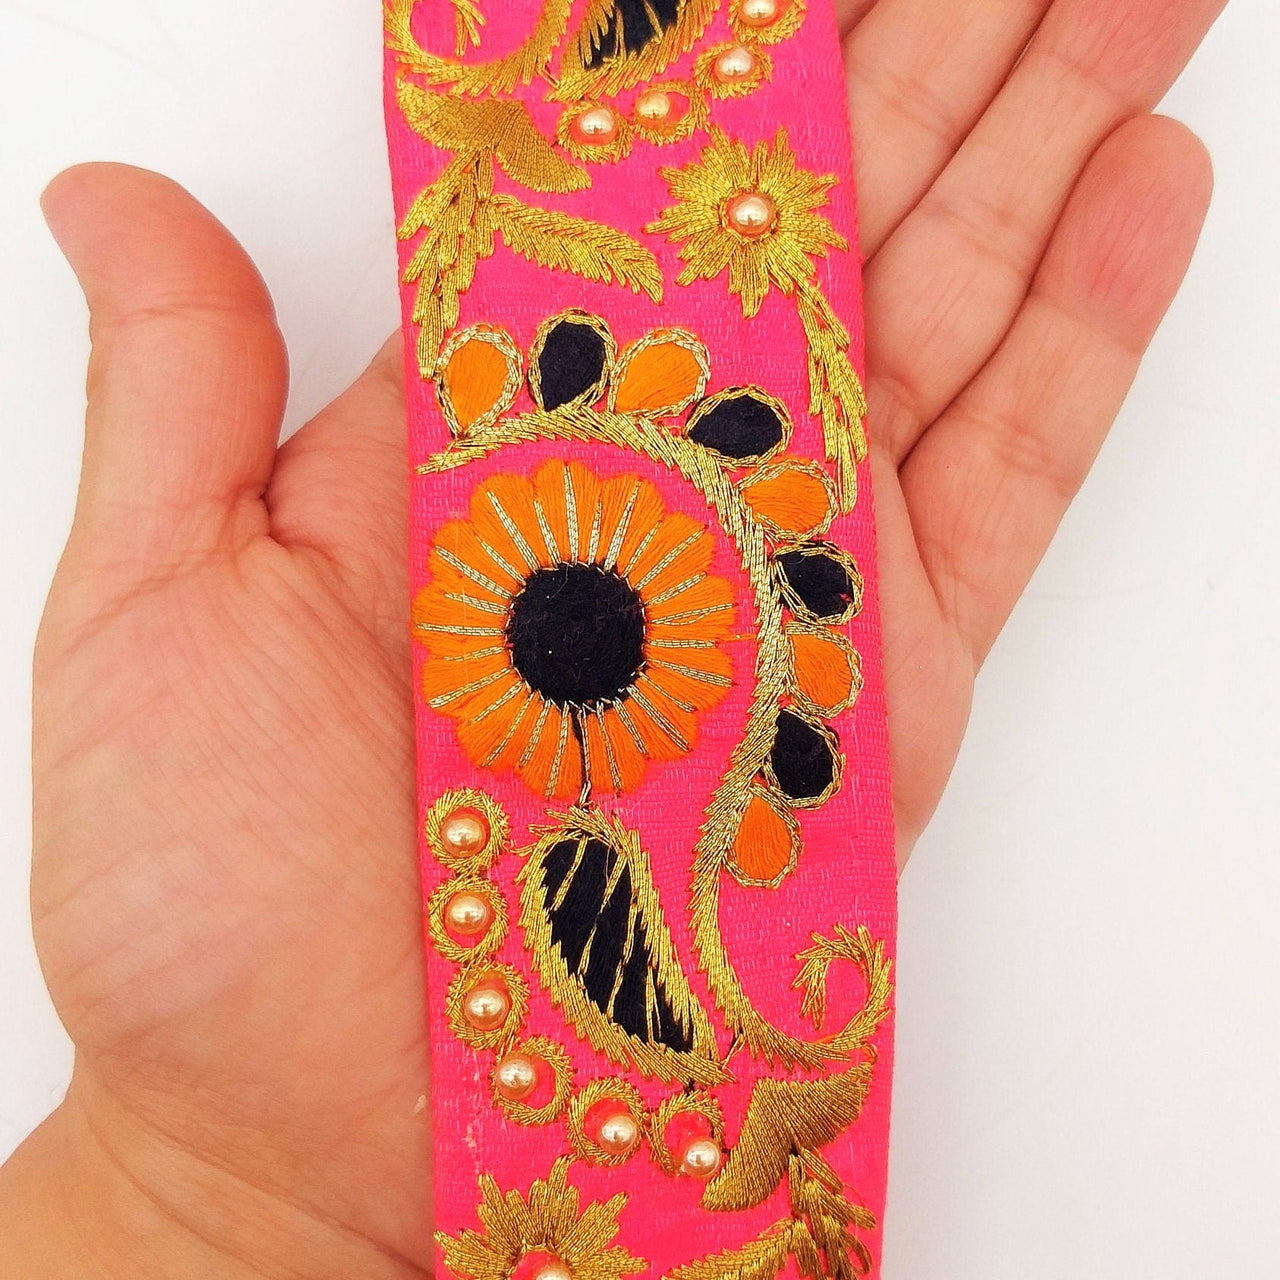 Pink Art Silk Lace Trim, Floral Embroidery in Orange, Black and Gold